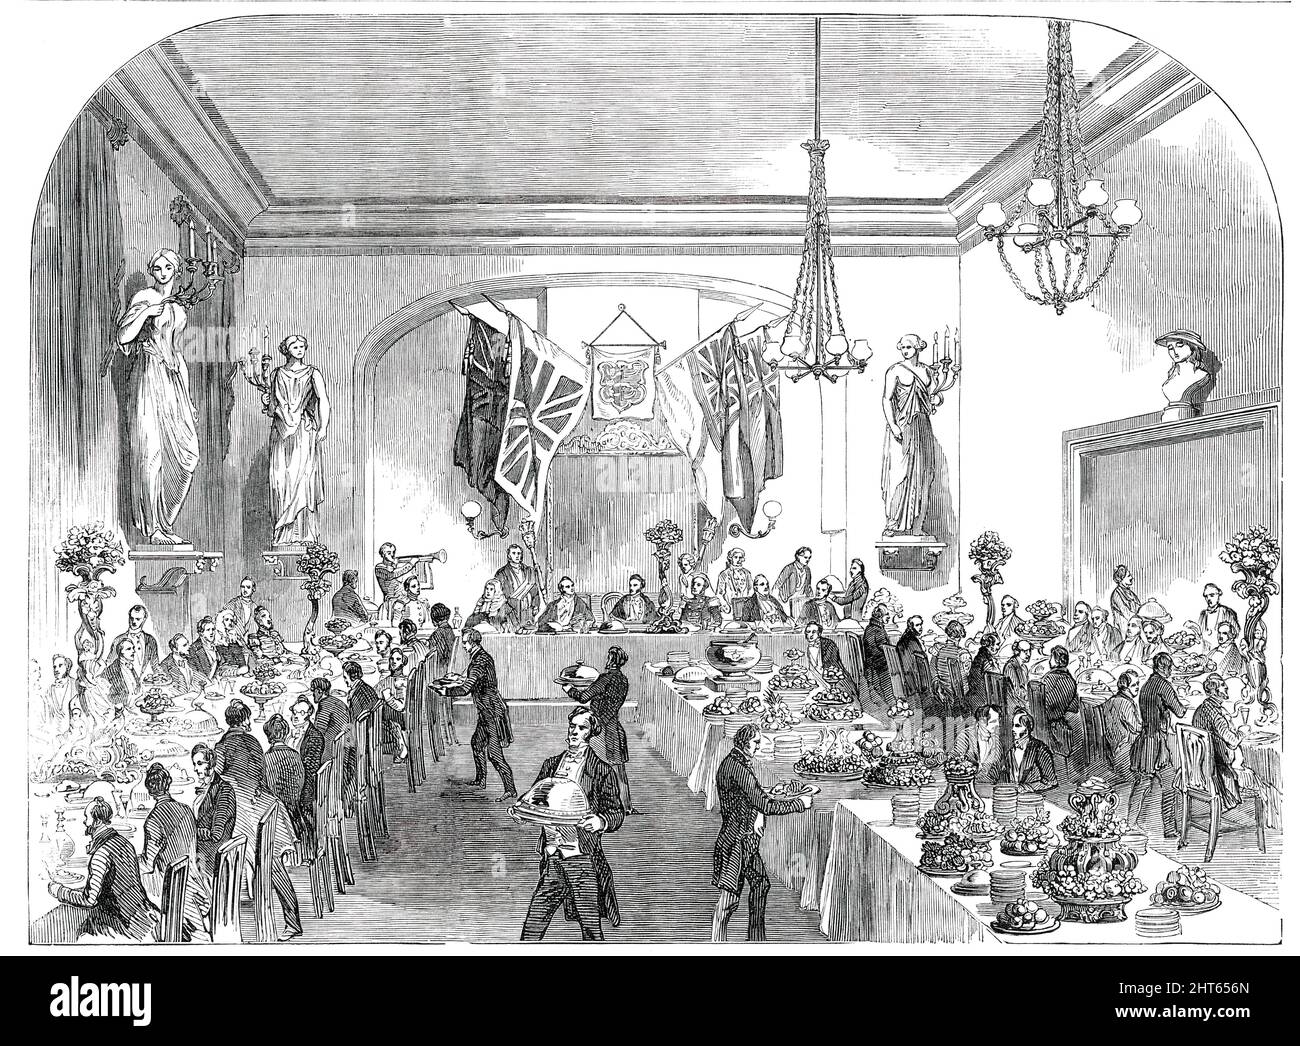 Grand Banquet to the Lord Mayor of London, at Hastings, [Sussex], 1850. 'The banquet took place in an elegant room, embellished with statues of the Muses. On a table, in the centre of the room, stood...the vast silver punch-bowl presented by the Barons who attended the coronation of King George II. and Queen Caroline...The more distinguished of the guests occupied a table...situated on a slightly elevated dais. Behind and above them were the national colours and the corporation arms. [The banquet] was provided by Mr. Carswell, of the Swan Hotel, assisted by Messrs. Ring and Brymer...'. The May Stock Photo